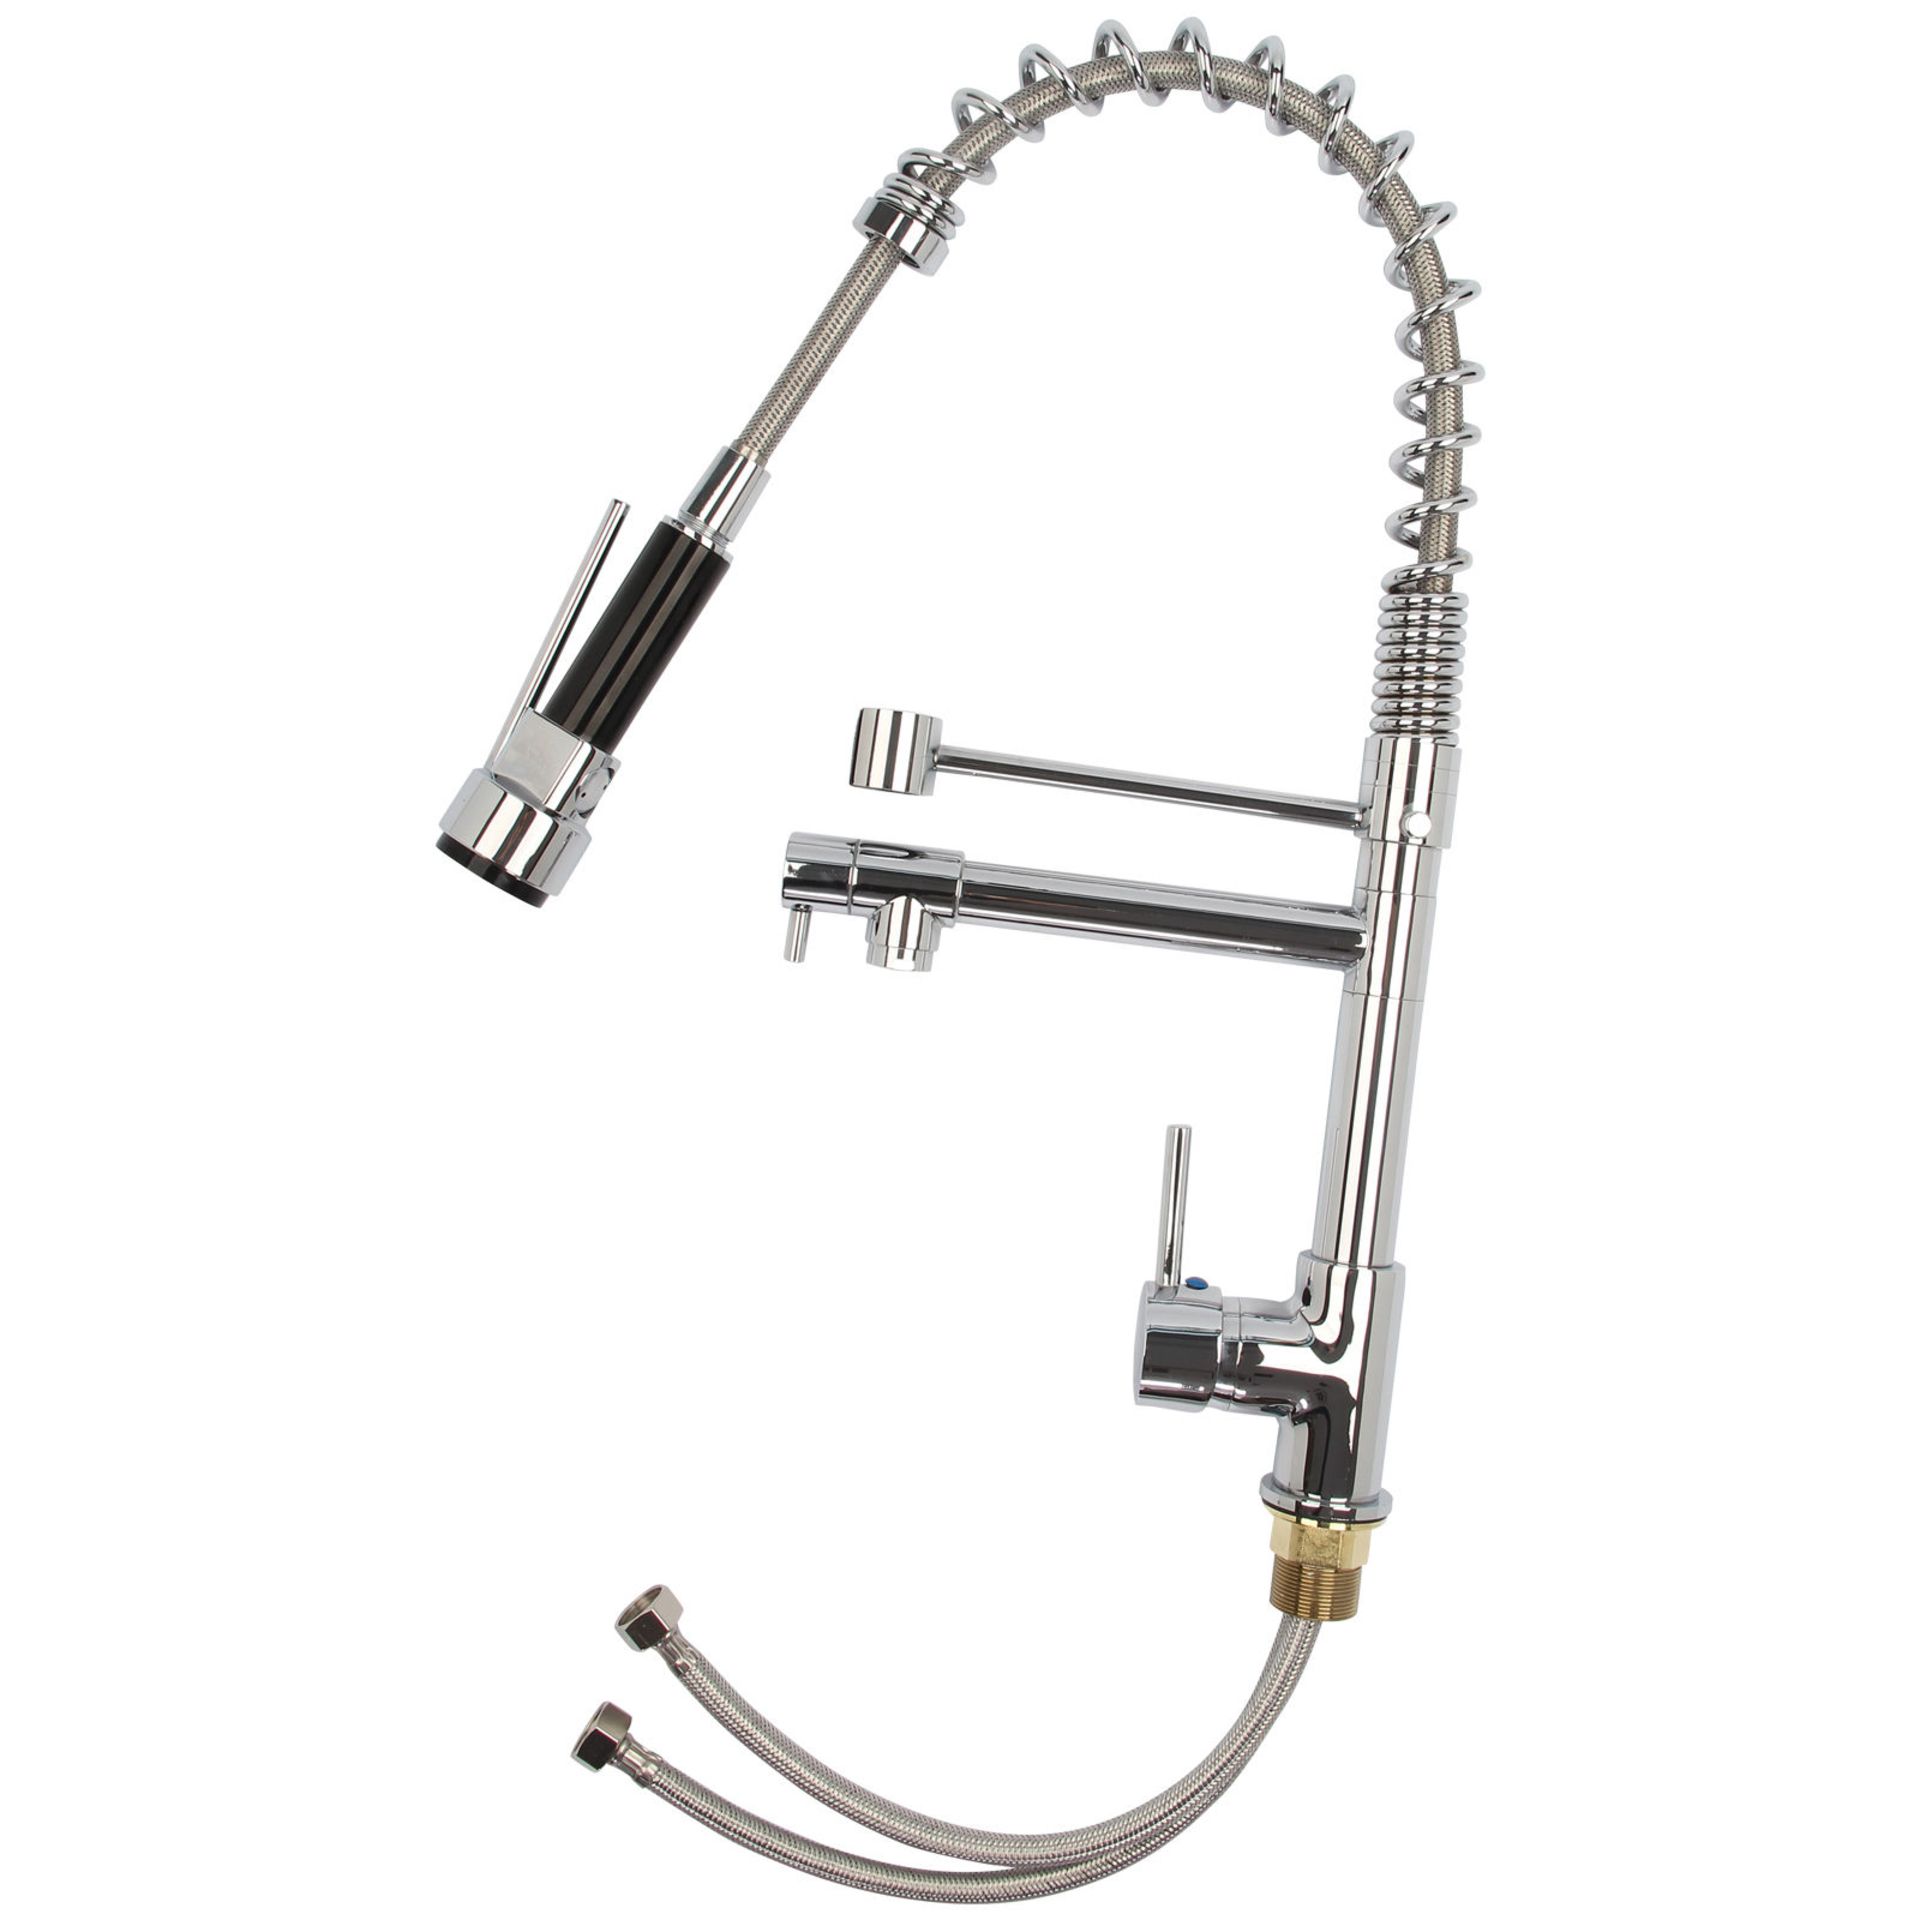 (P269) Bentley Modern Monobloc Chrome Brass Pull Out Spray Mixer Tap. RRP £349.99. This tap is - Image 2 of 2